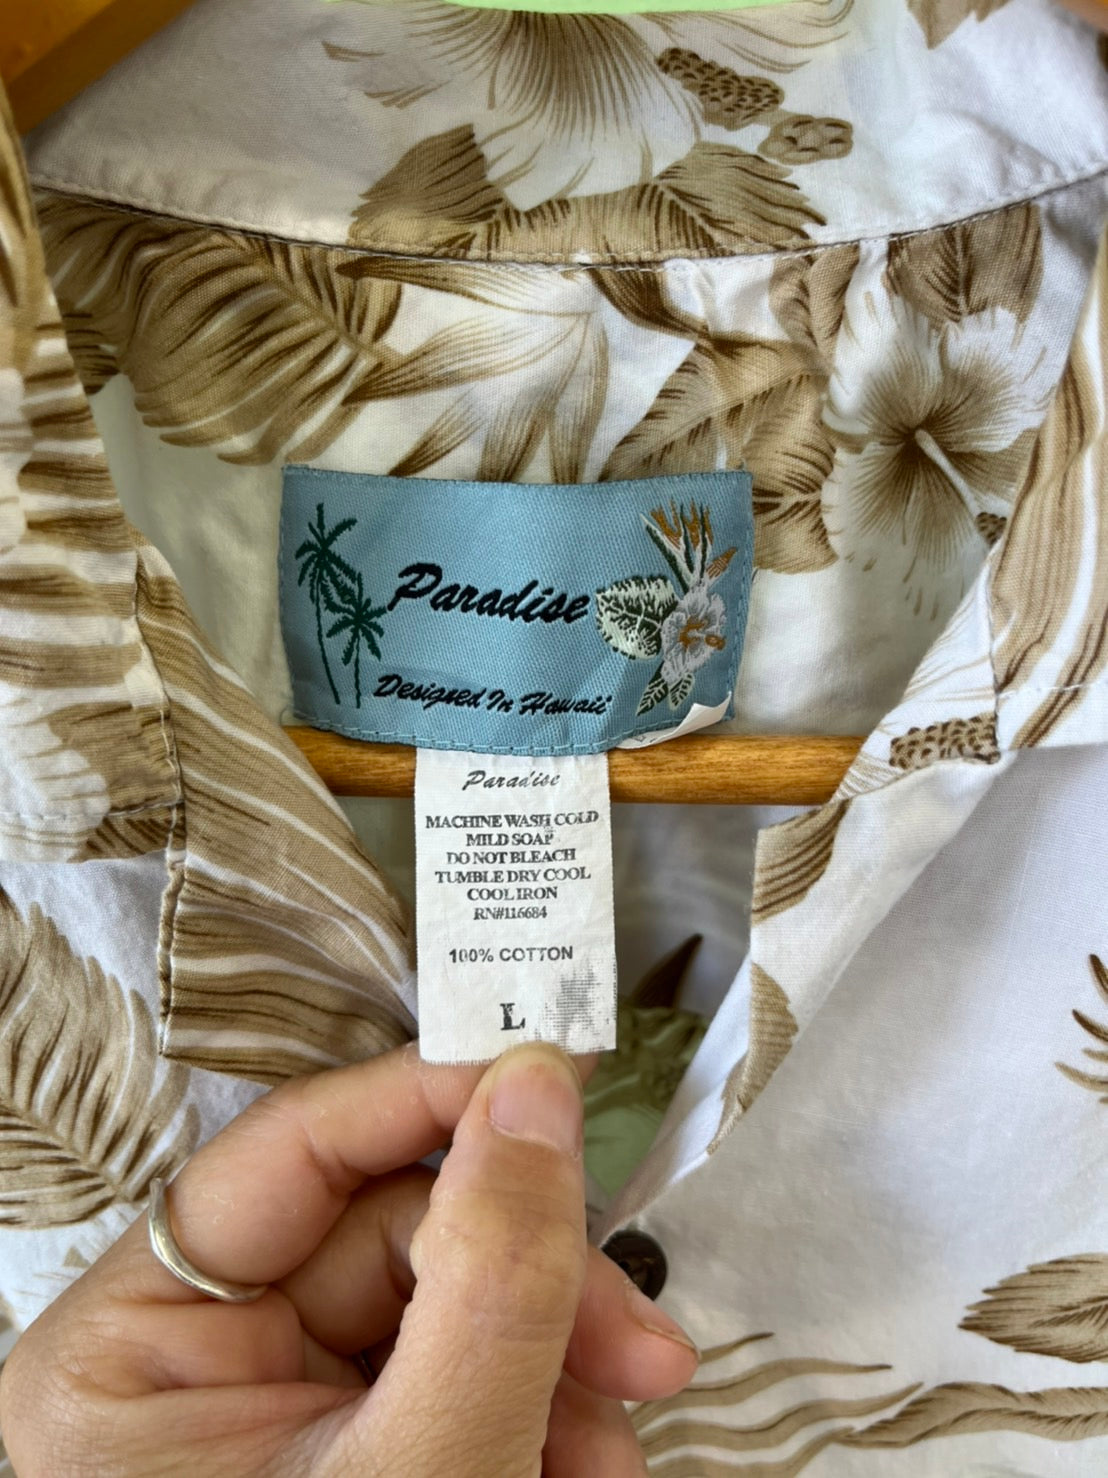 【Paradise】All Over Pattan Cotton Aloha Shirt Designed in hawaii 総柄 リーフ柄 アロハシャツ (men's L)